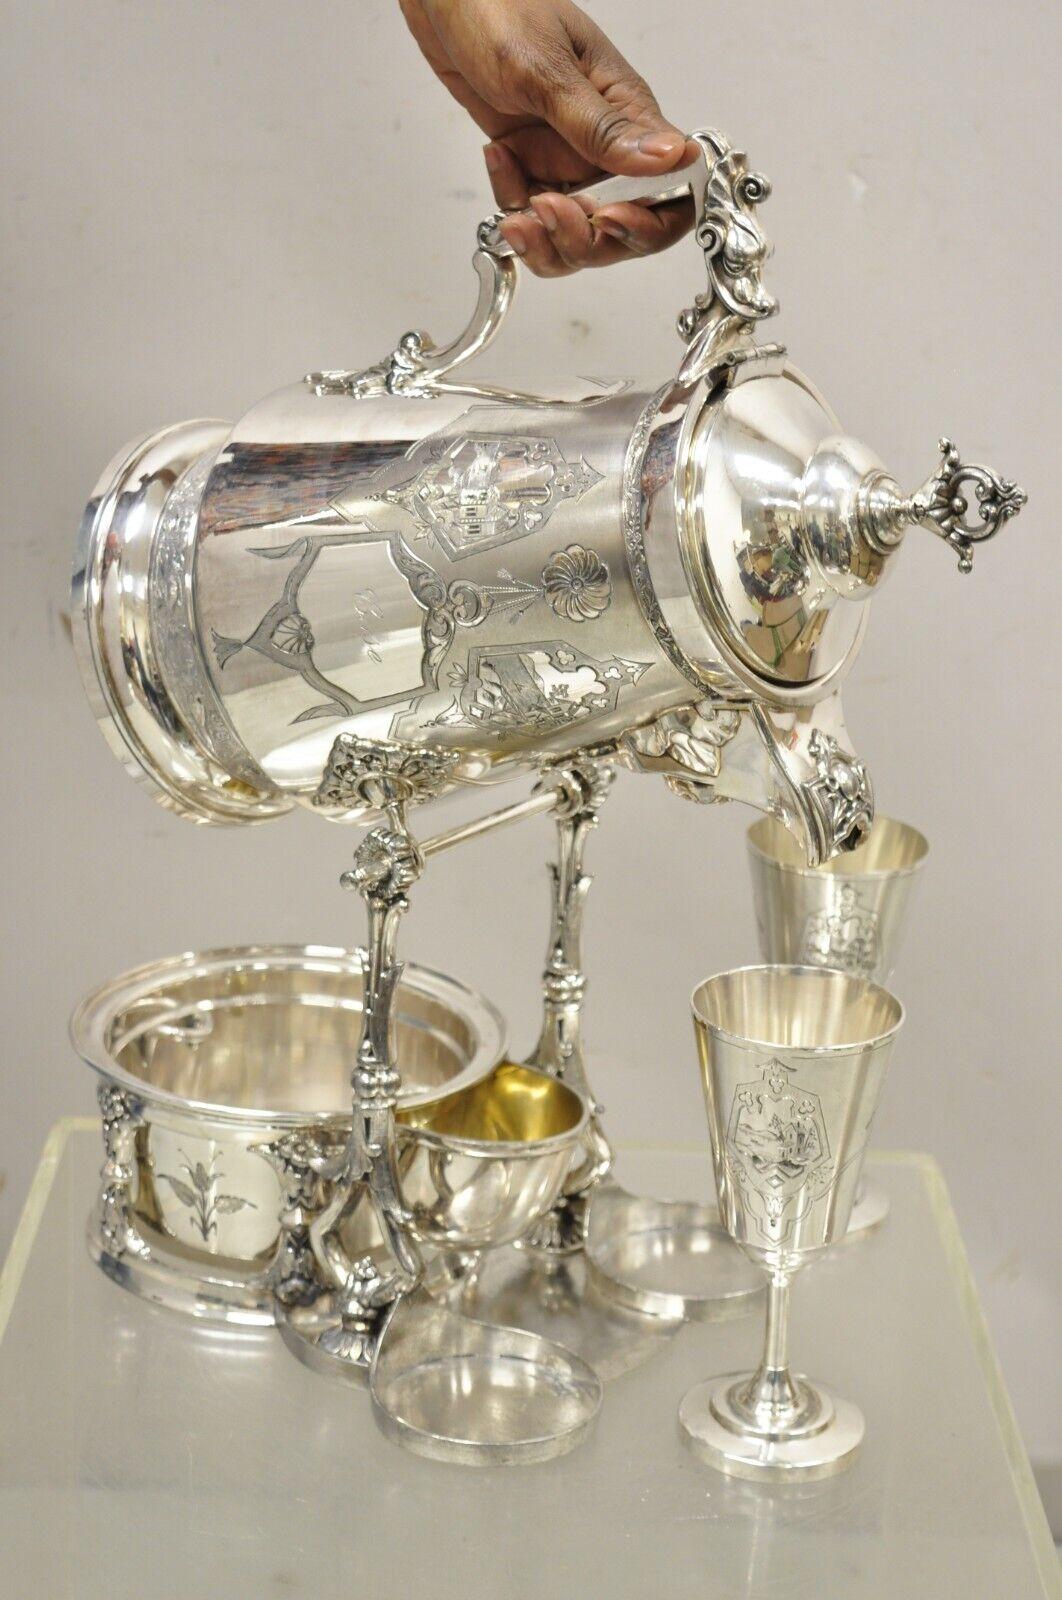 Racine Silverplated Victorian Tilting Lemonade Water Pitcher on Stand w/ Goblets. Item features stunning ornate figural details, Egyptian Revivial Face to spout of pitcher, dragon to handle, engraved 